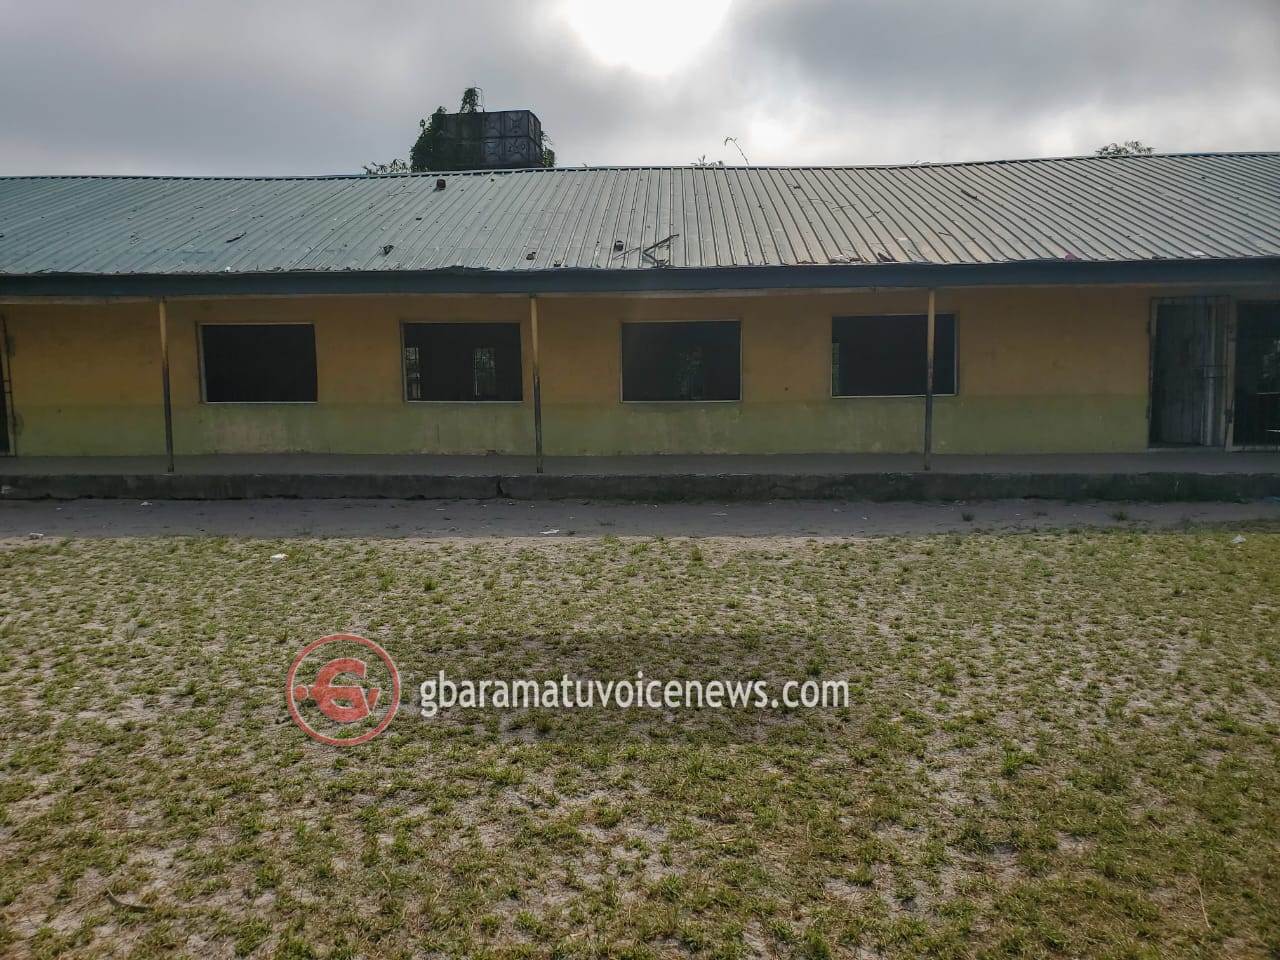 Infrastructural decay under Governor Okowa’s leadership continues: The current state of Kokodiagbene Primary School